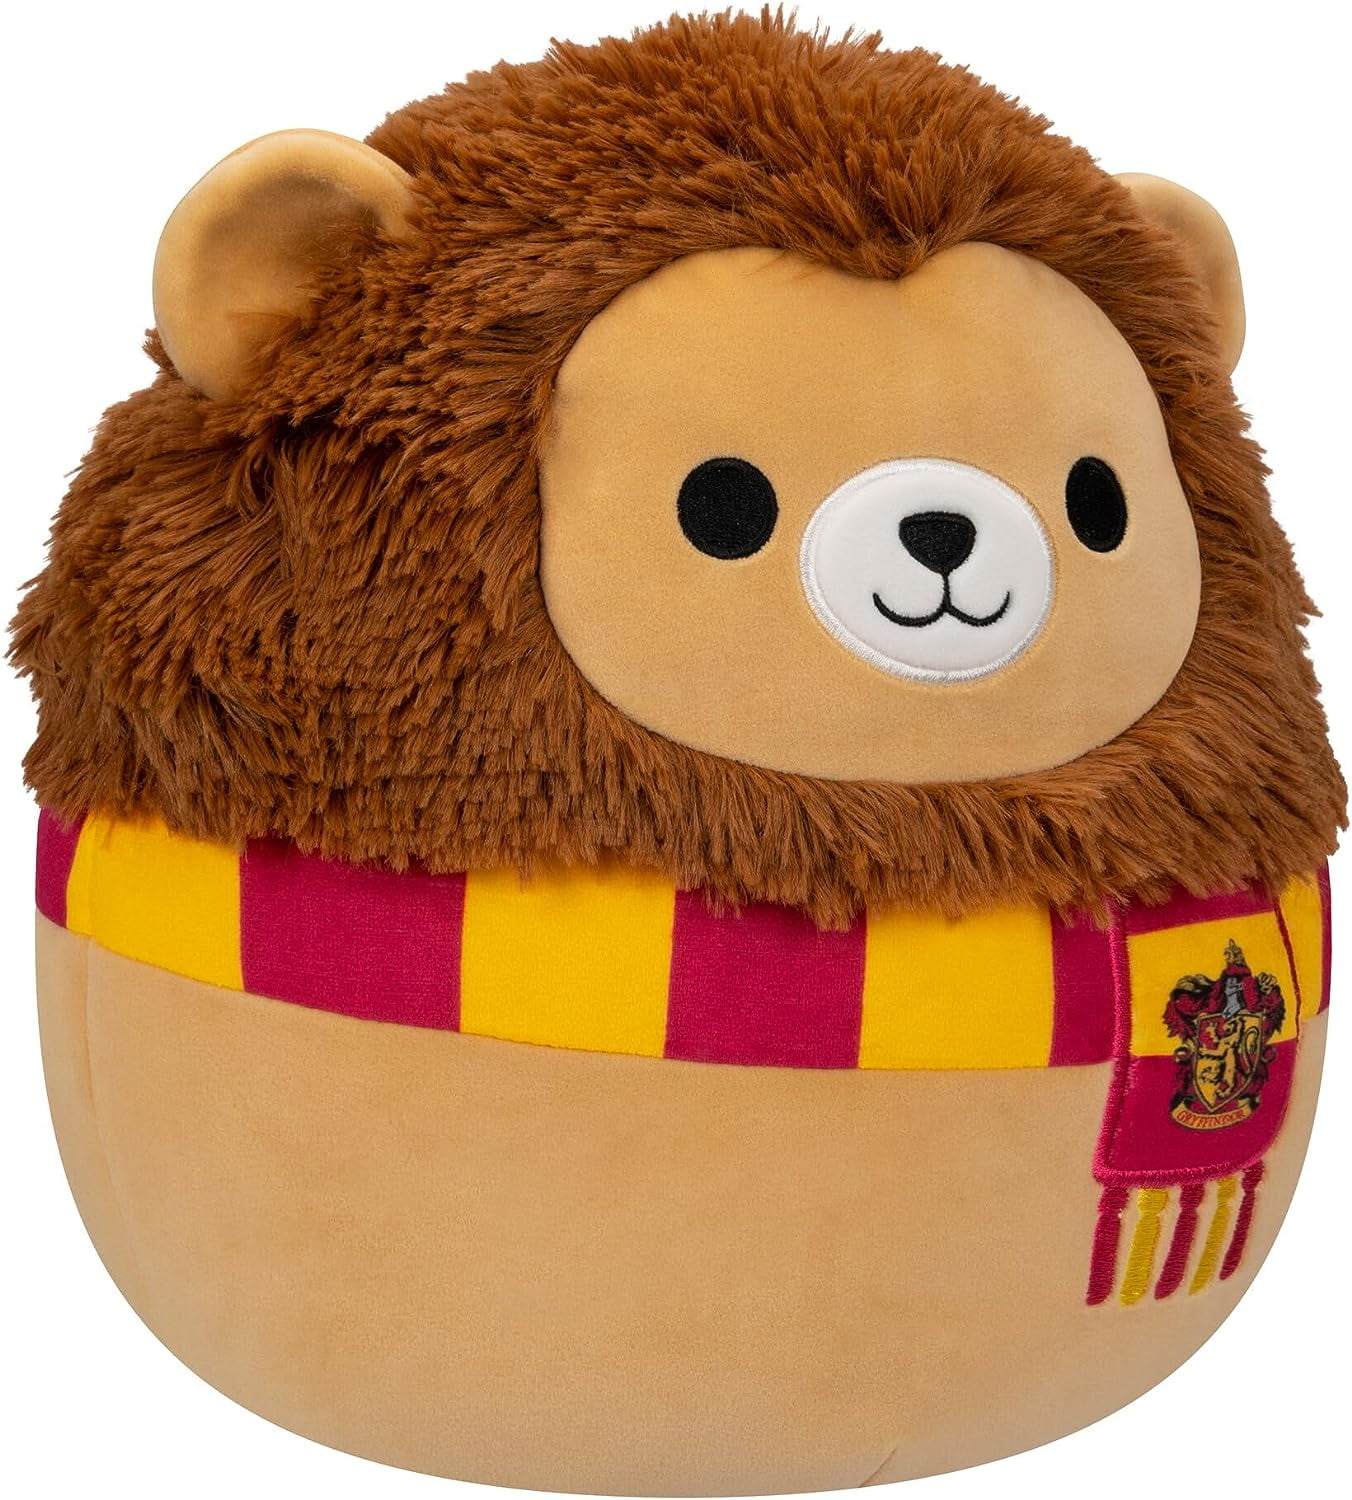 Squishmallow Harry Potter Full Set 8” Gryffindor Slytherin Ravenclaw  Hufflepuff